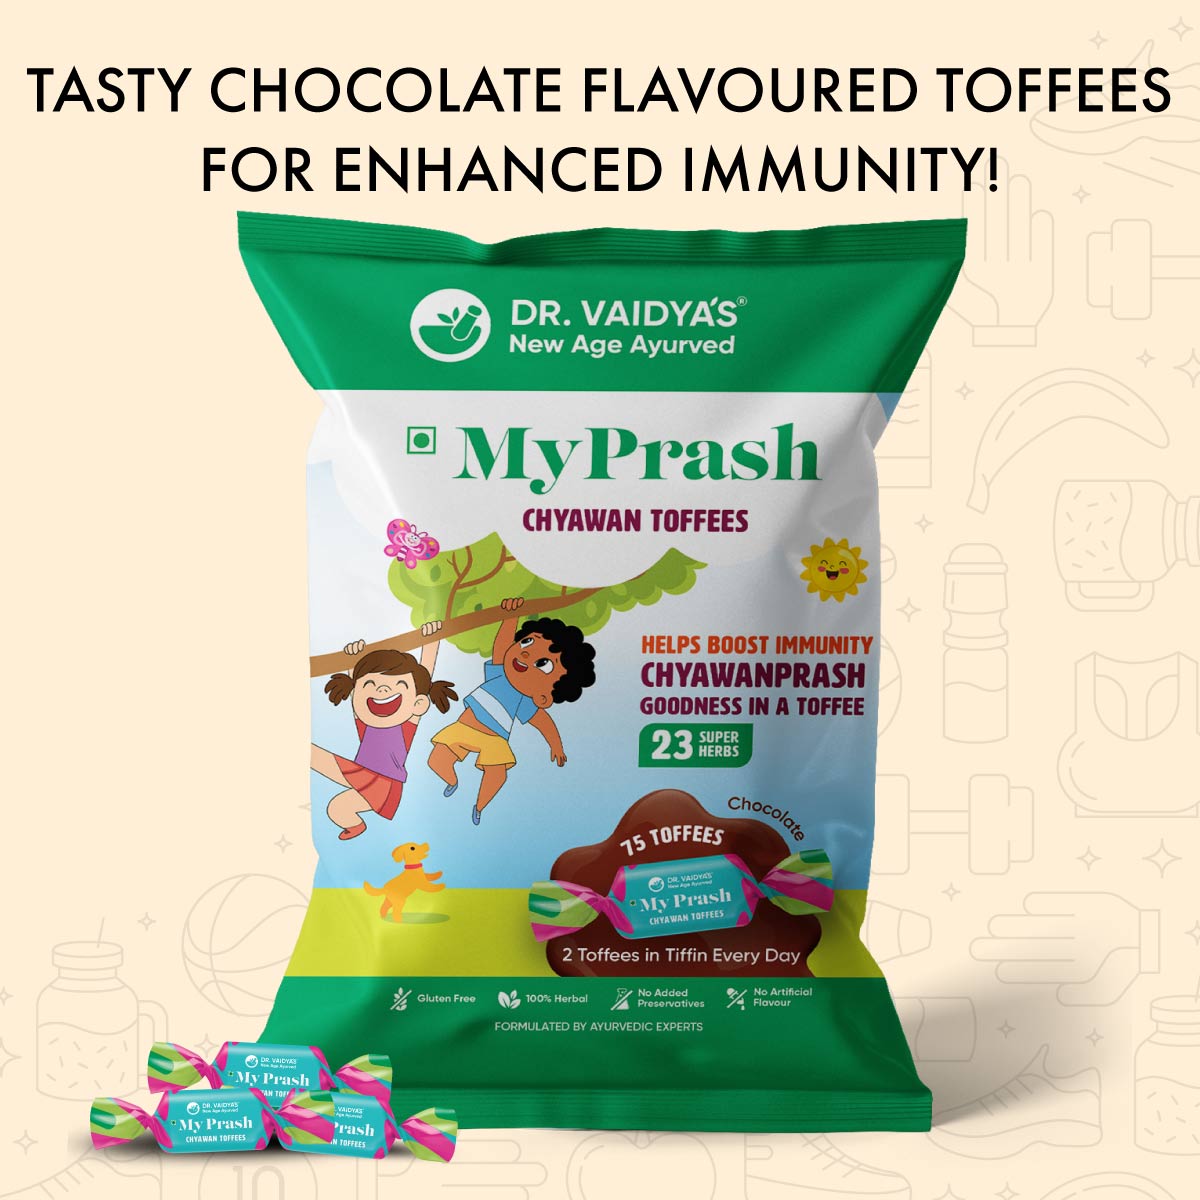 Chyawan Toffees: Goodness Of Chyawanprash In A Toffee